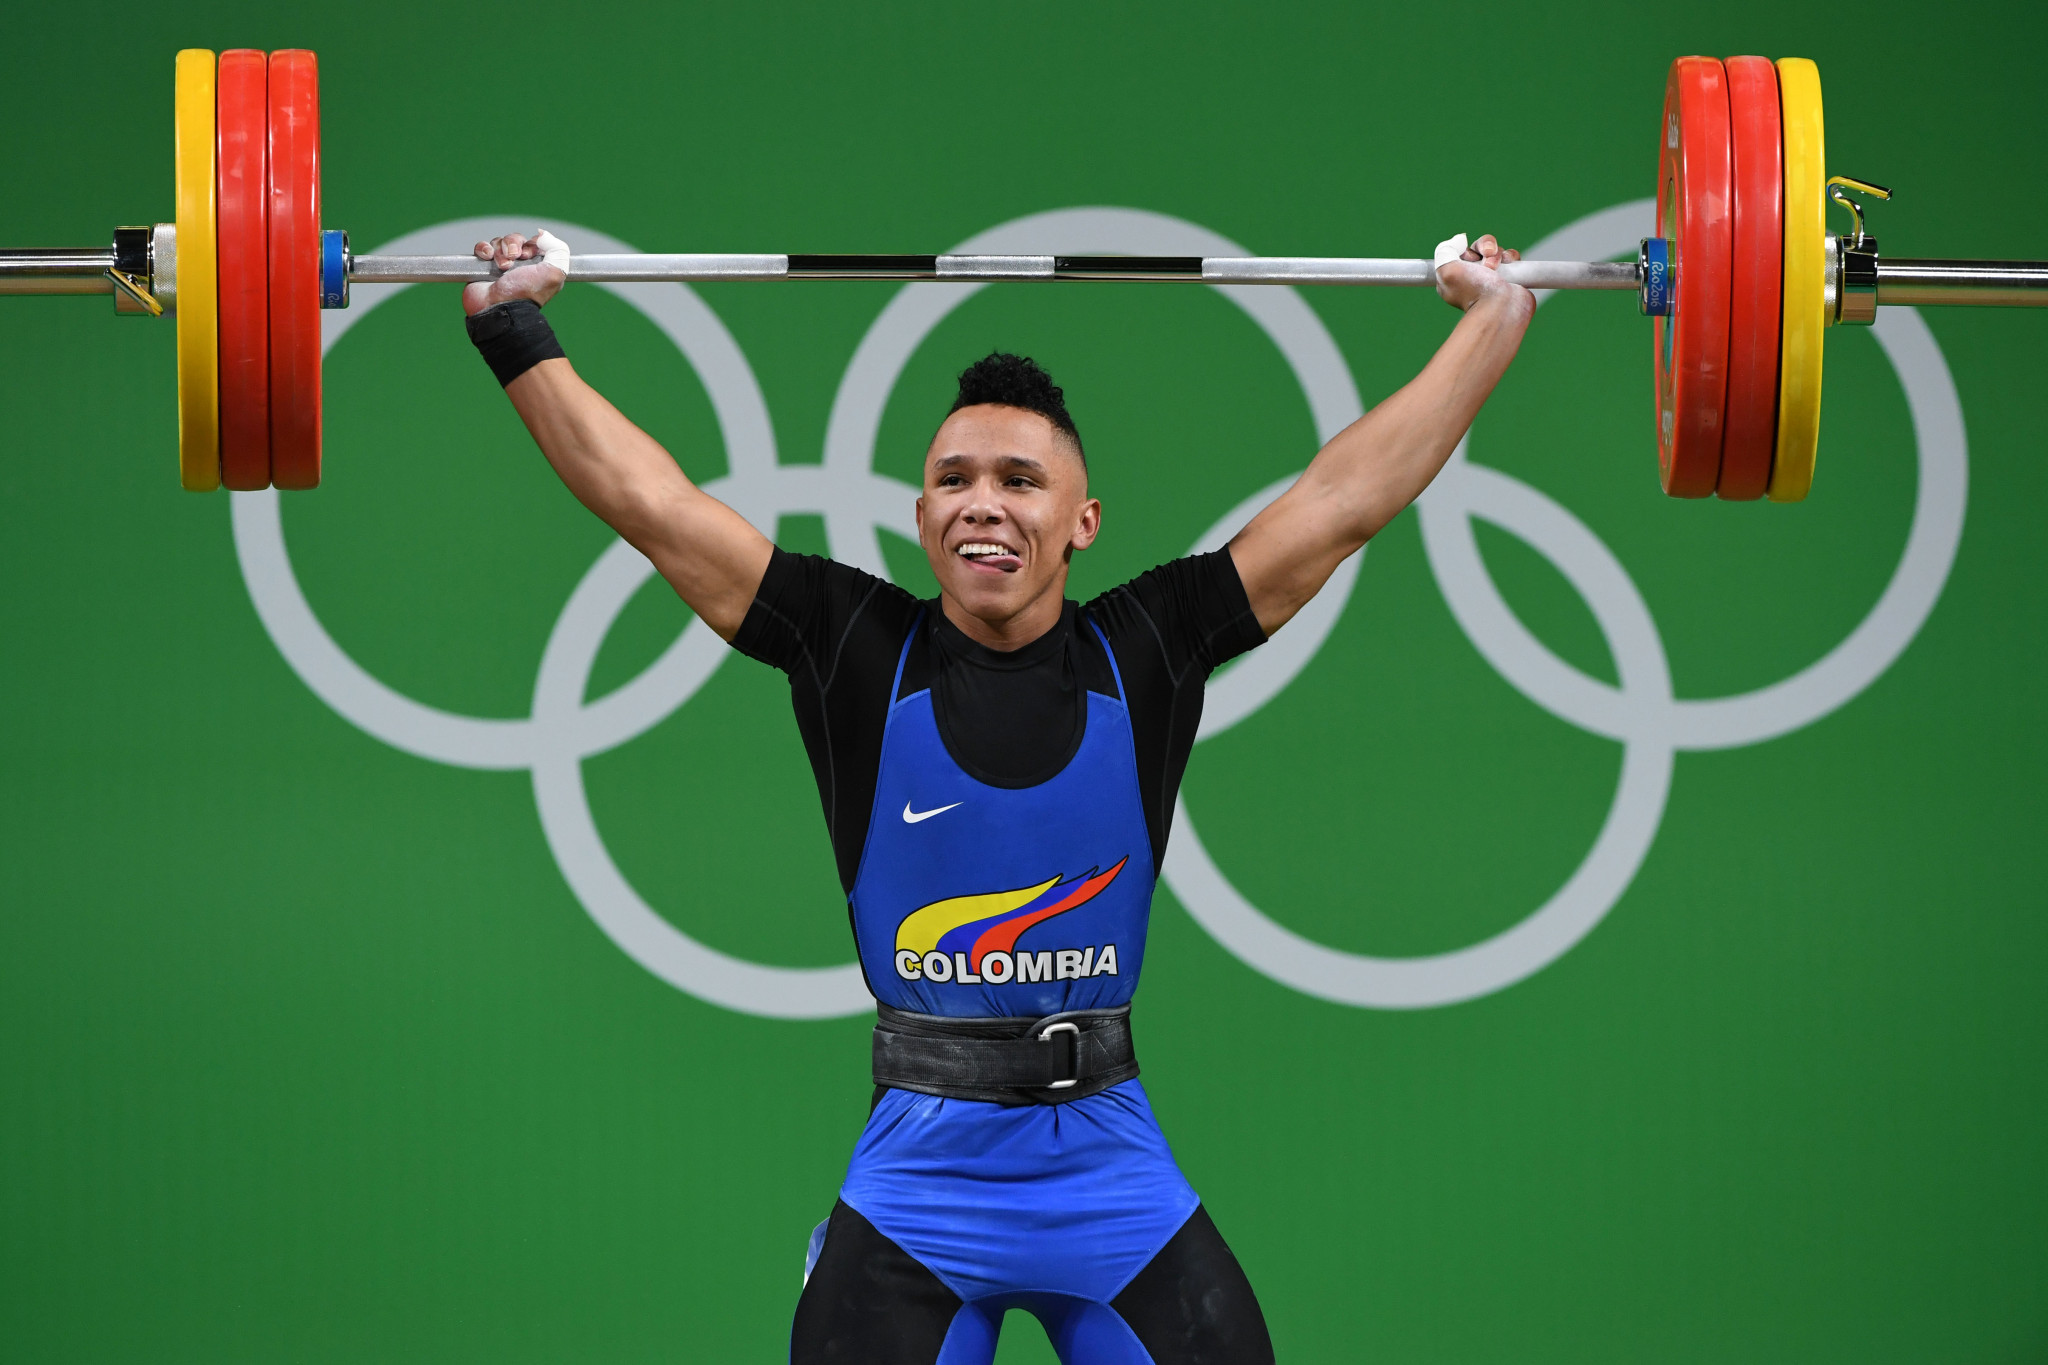 Luis Javier Mosquera was the standout weightlifter on home turf in Cali  ©Getty Images